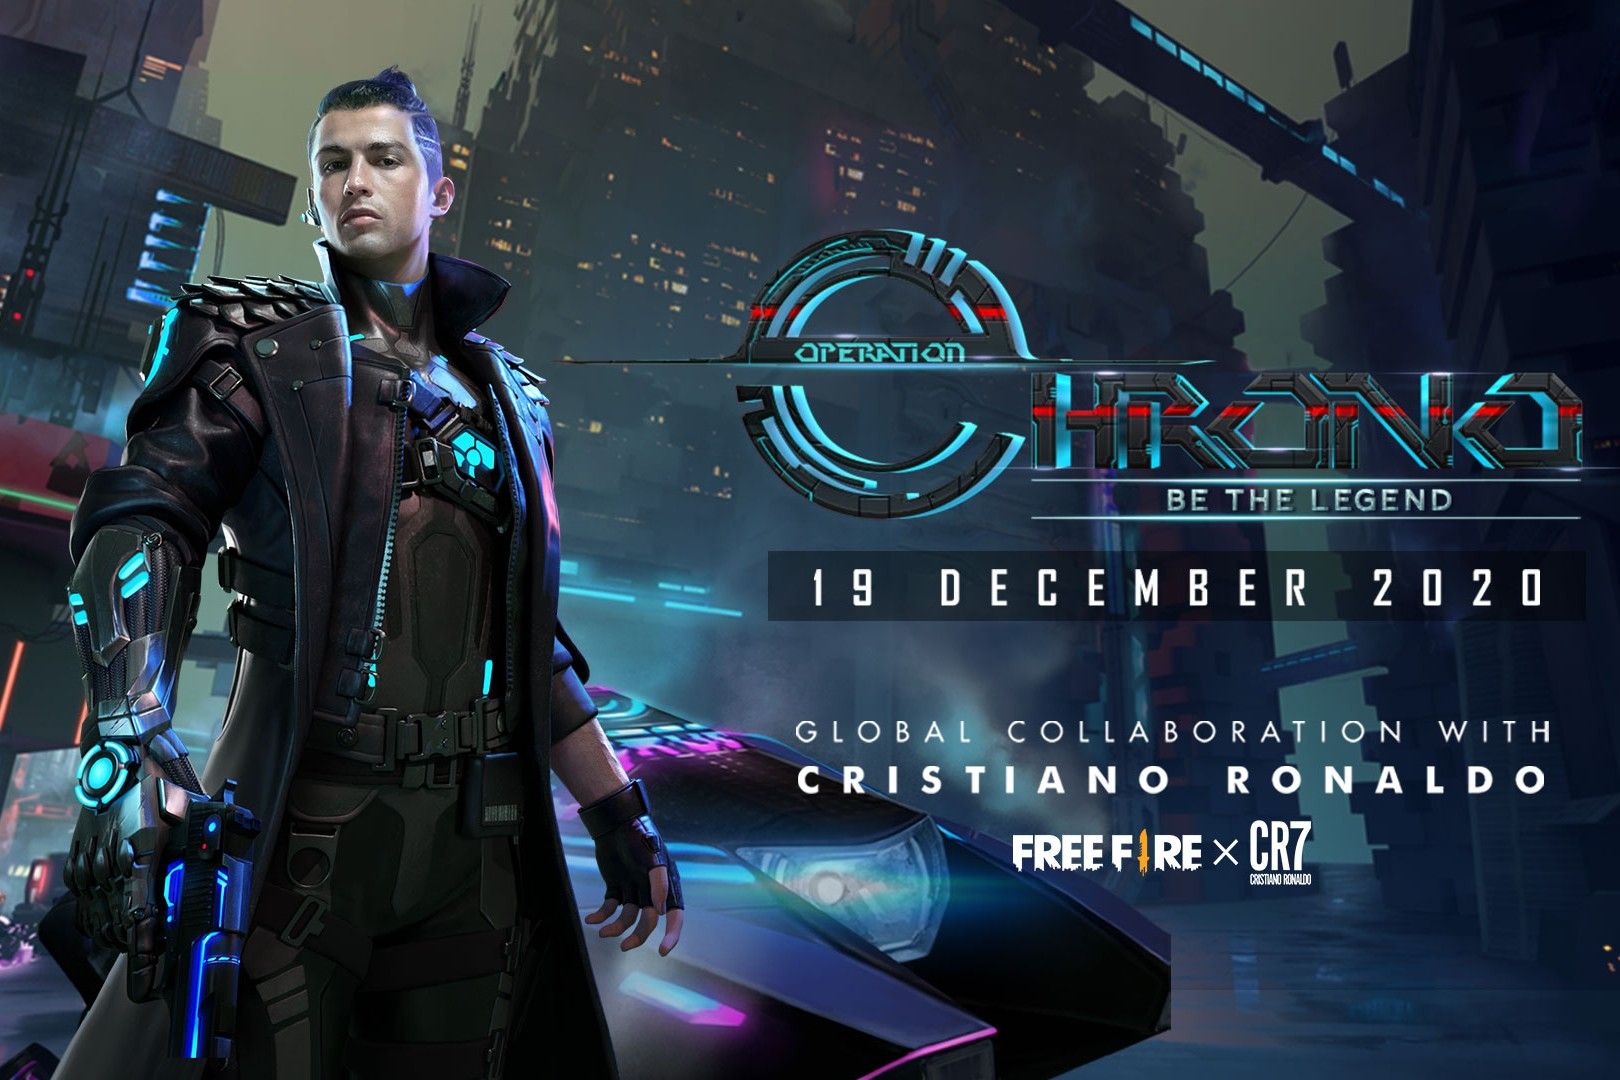 Garena Free Fire To Have Football Superstar Cristiano Ronaldo as Playable Character Named Chrono